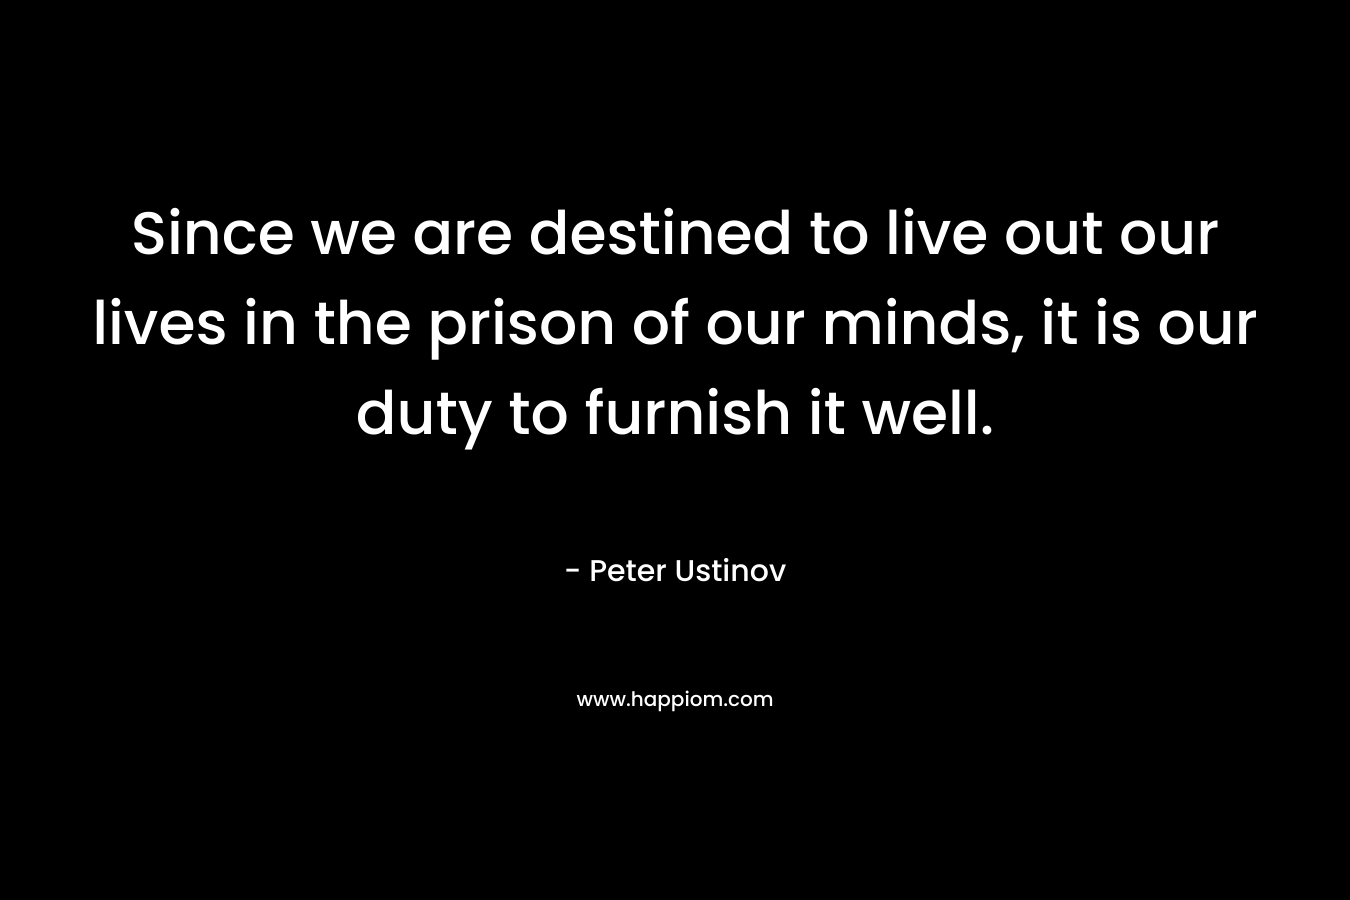 Since we are destined to live out our lives in the prison of our minds, it is our duty to furnish it well.